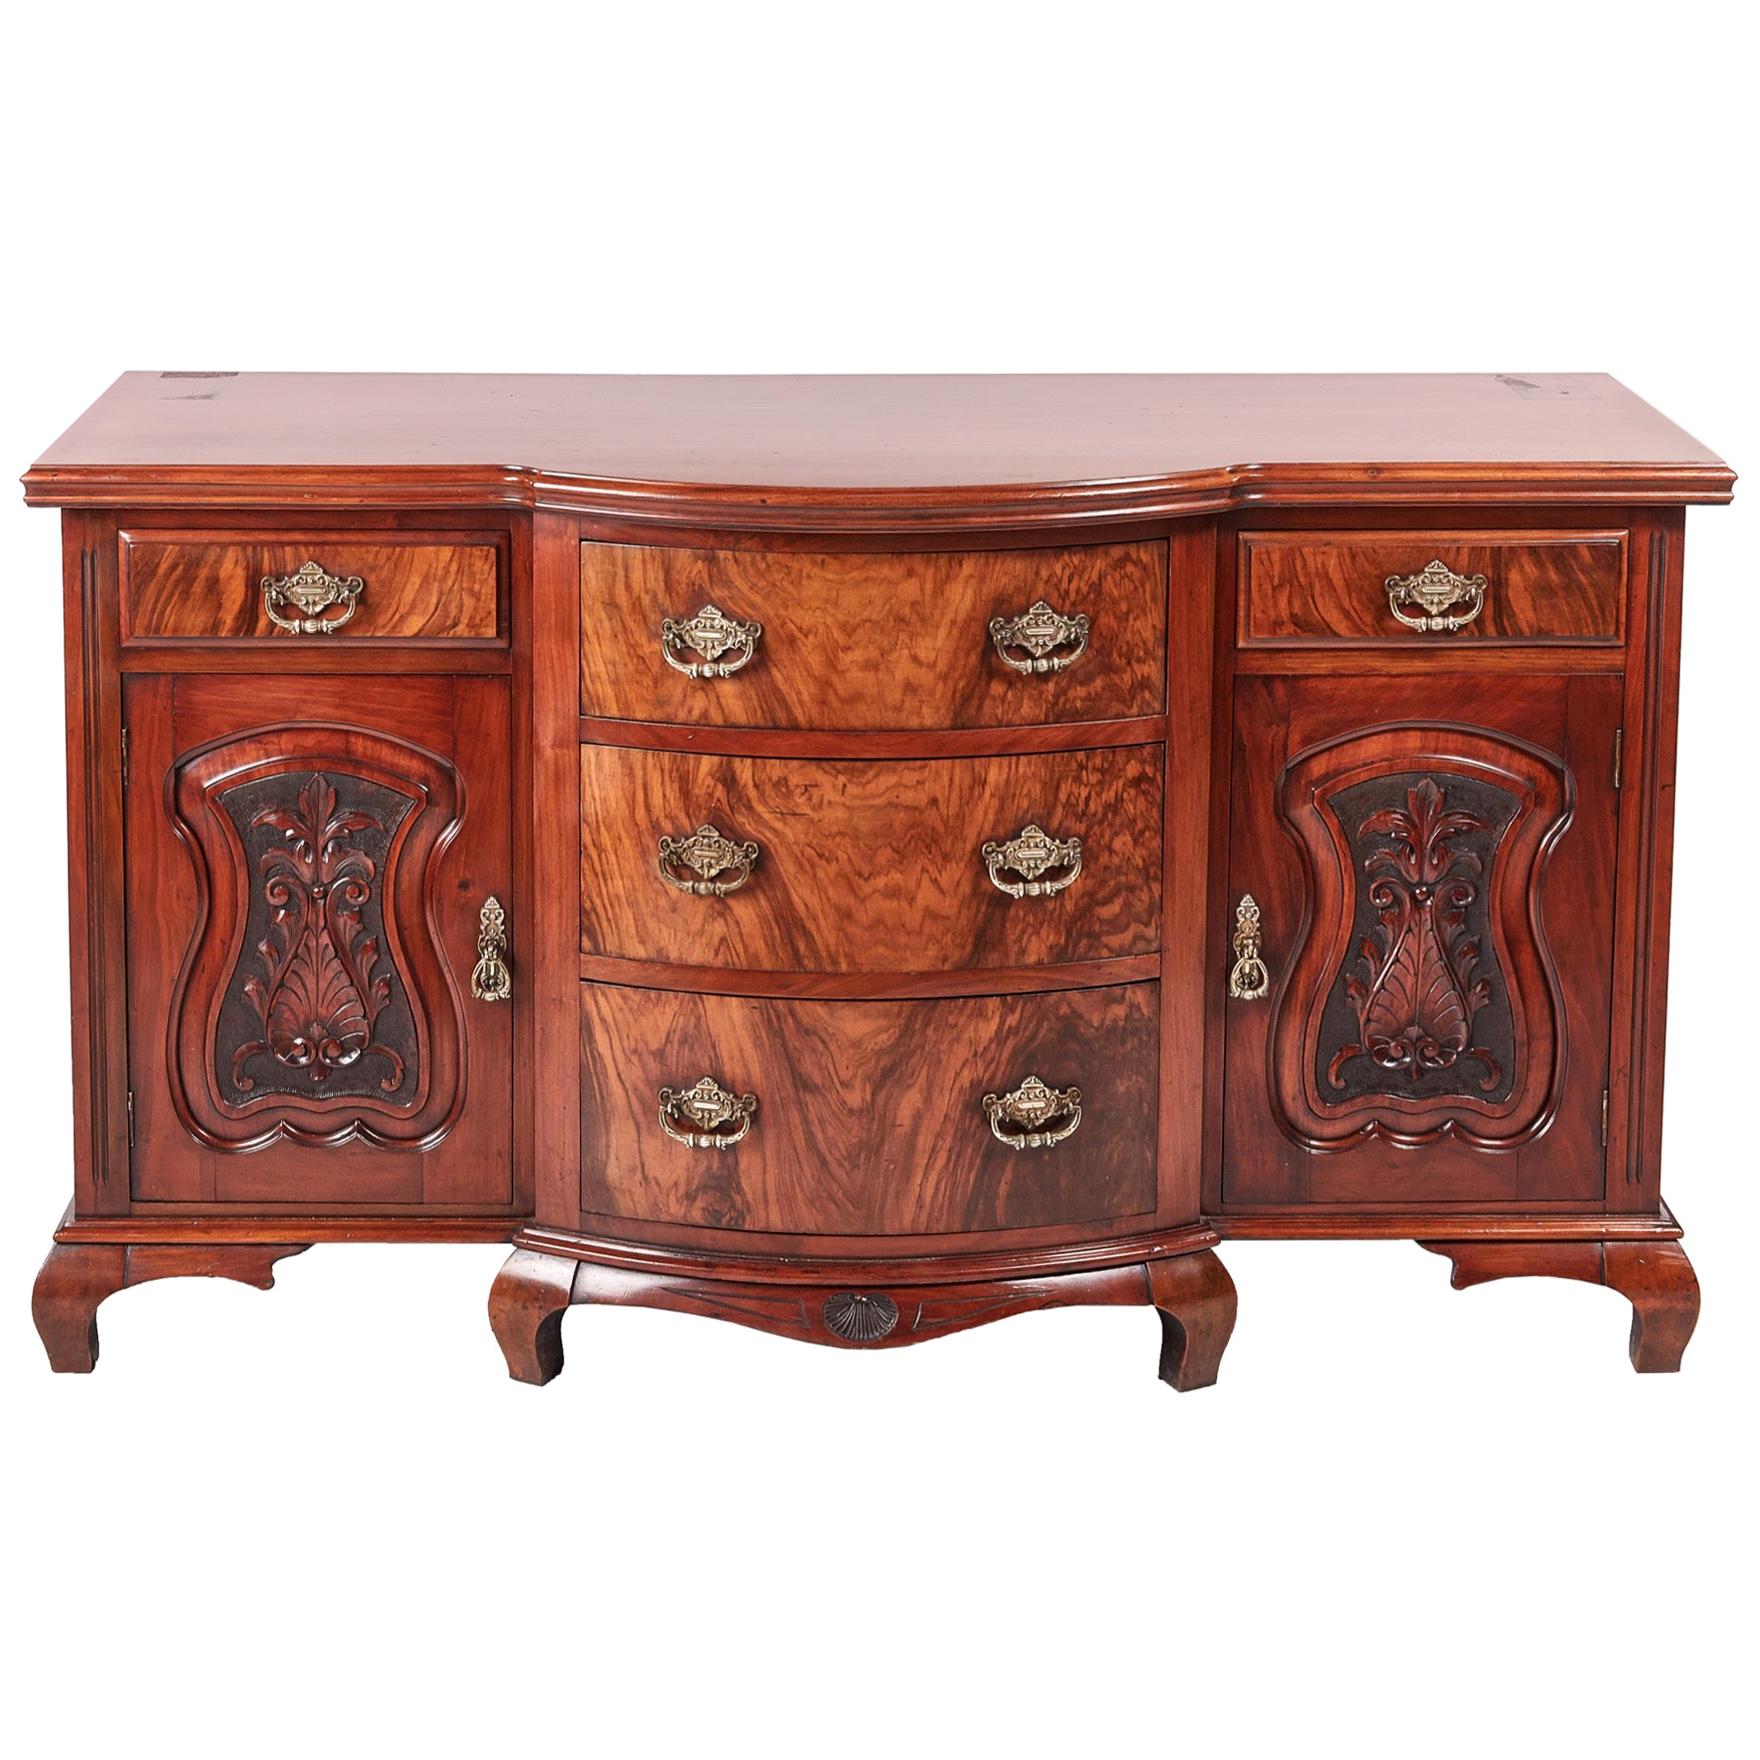 Fantastic Quality 19th Century Antique Victorian Carved Walnut Sideboard